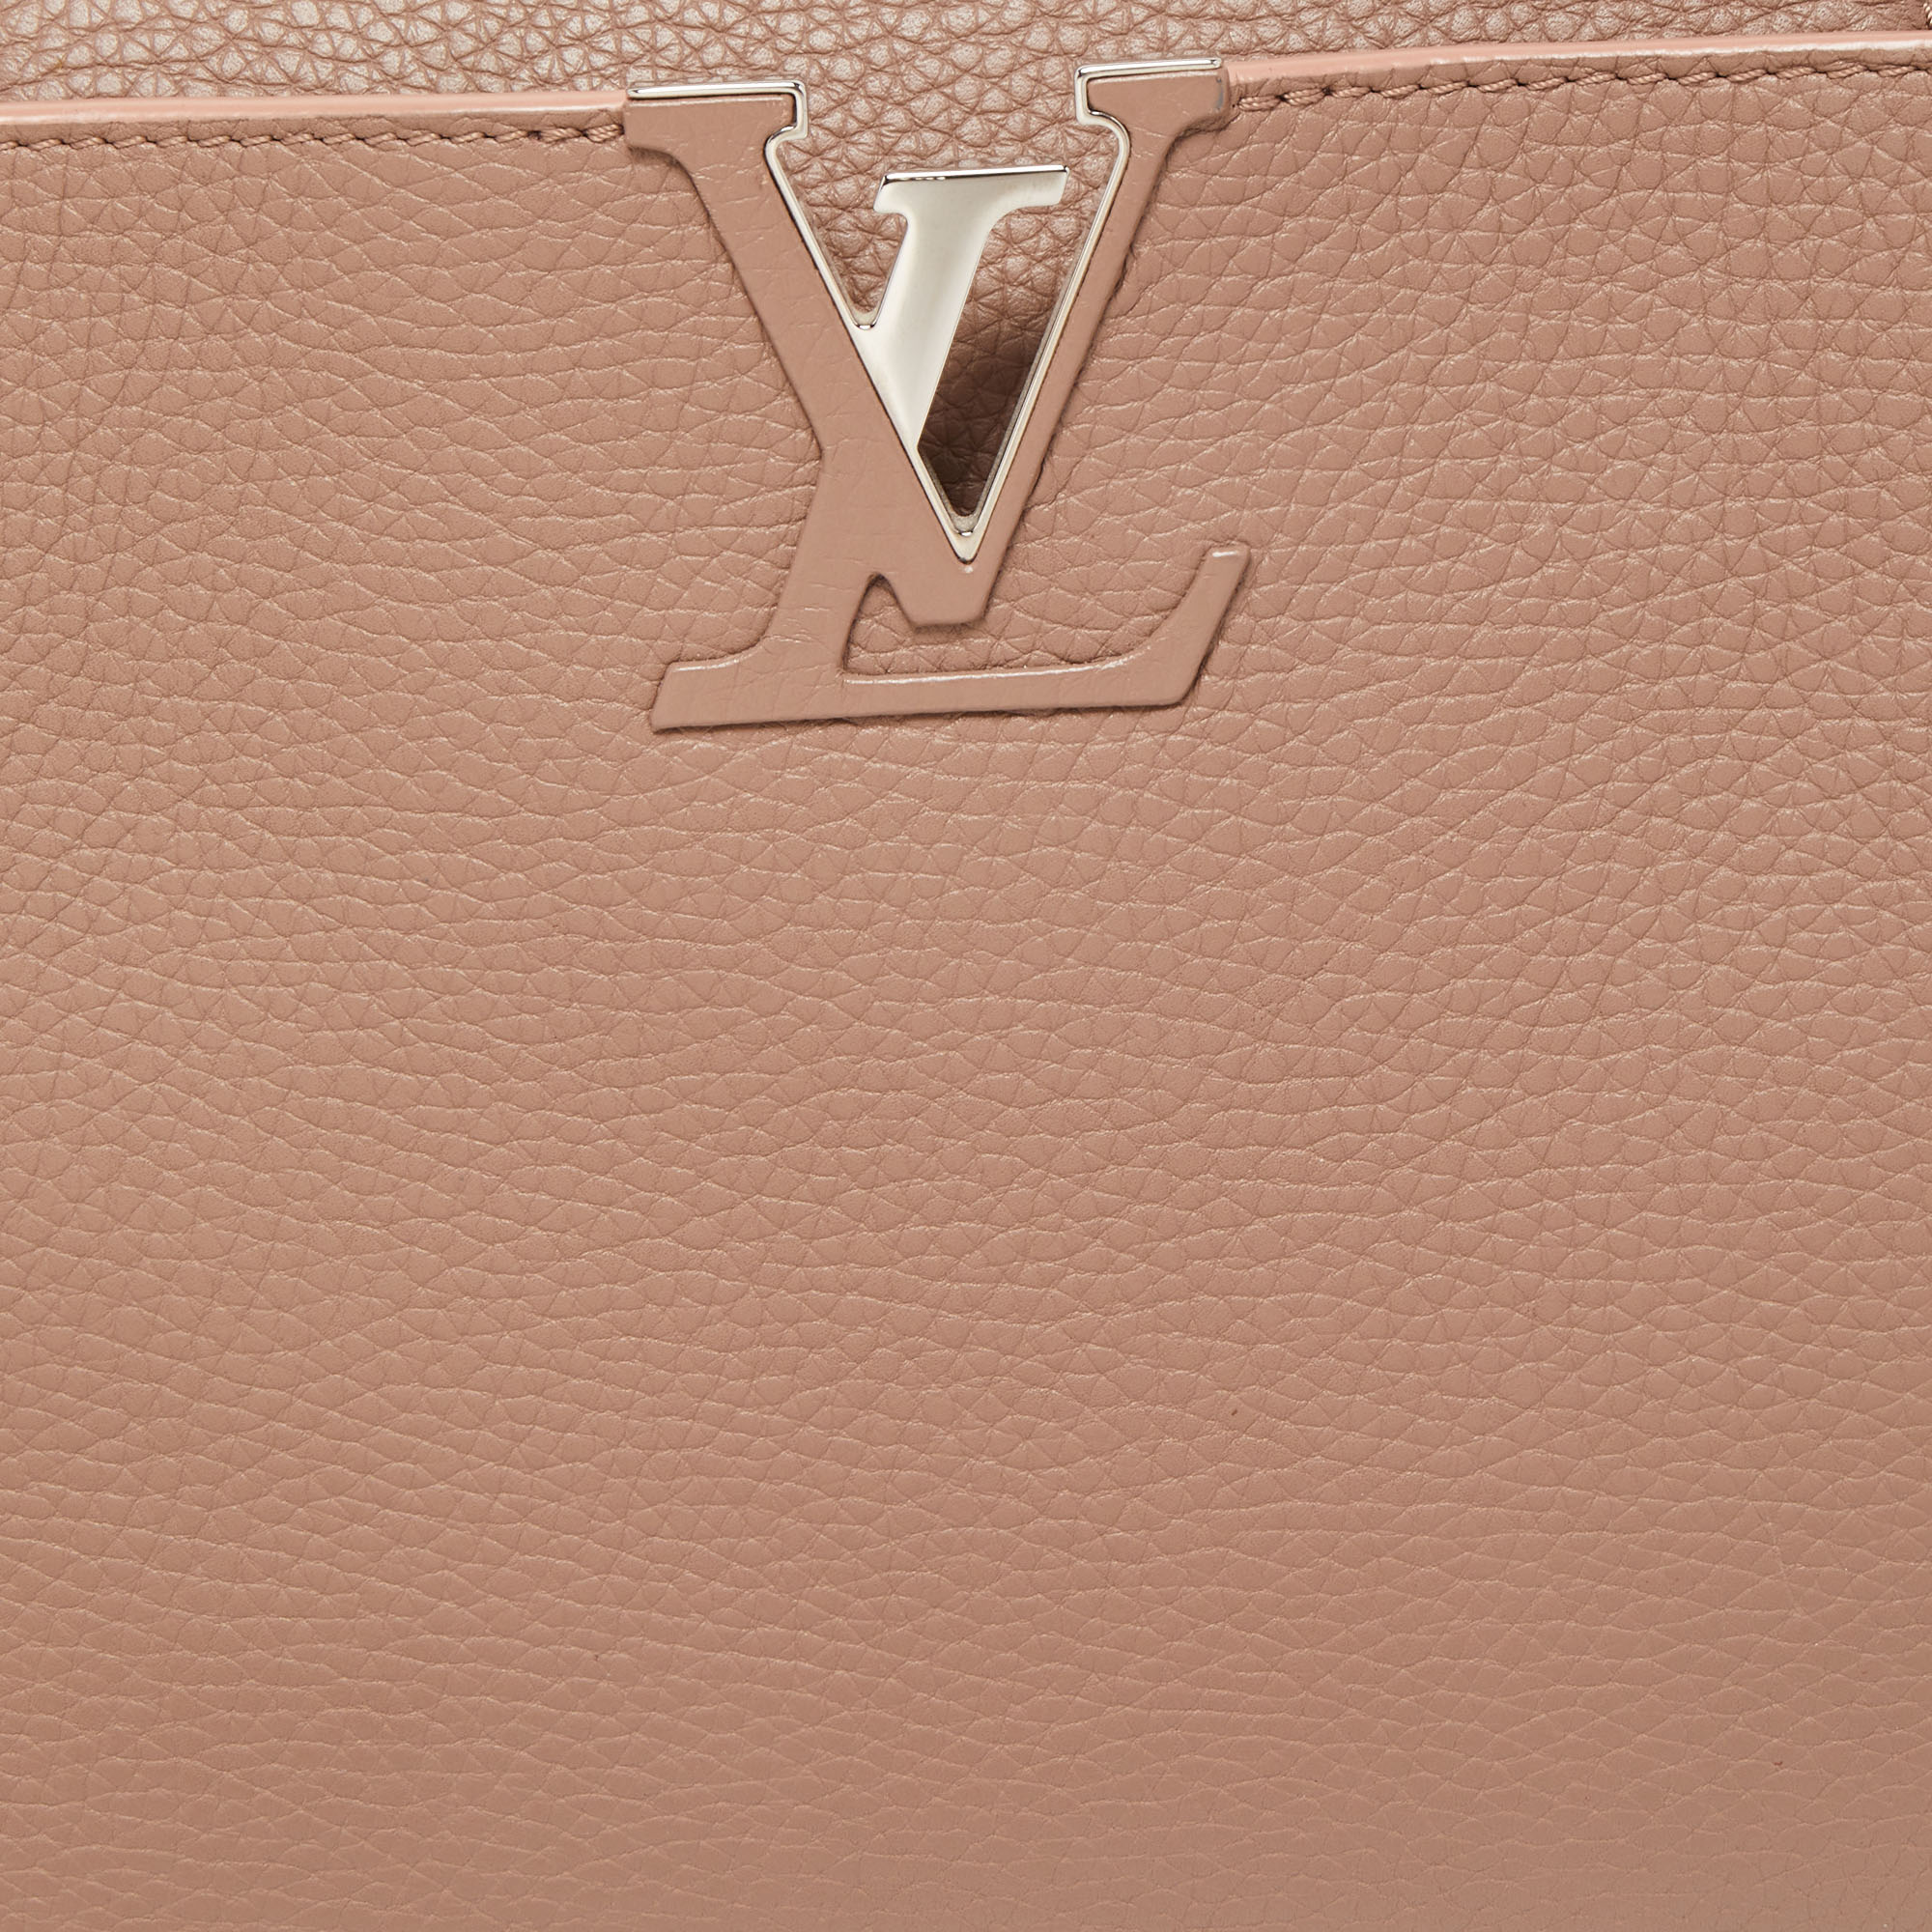 Louis Vuitton Old Rose Leather Capucines MM Bag